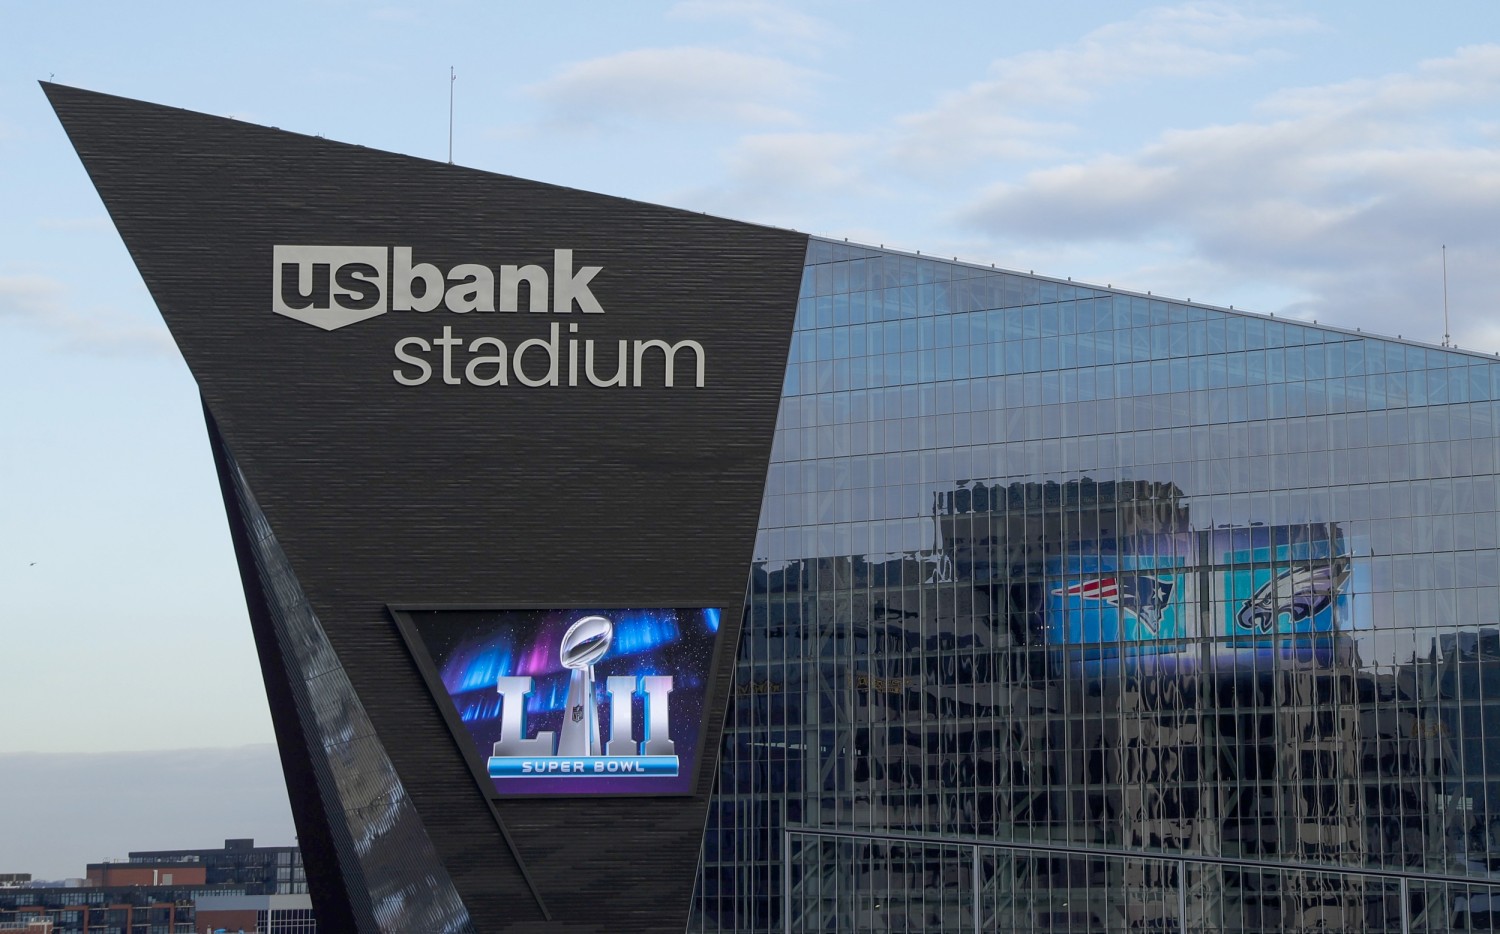 Here's who's buying Super Bowl tickets according to StubHub